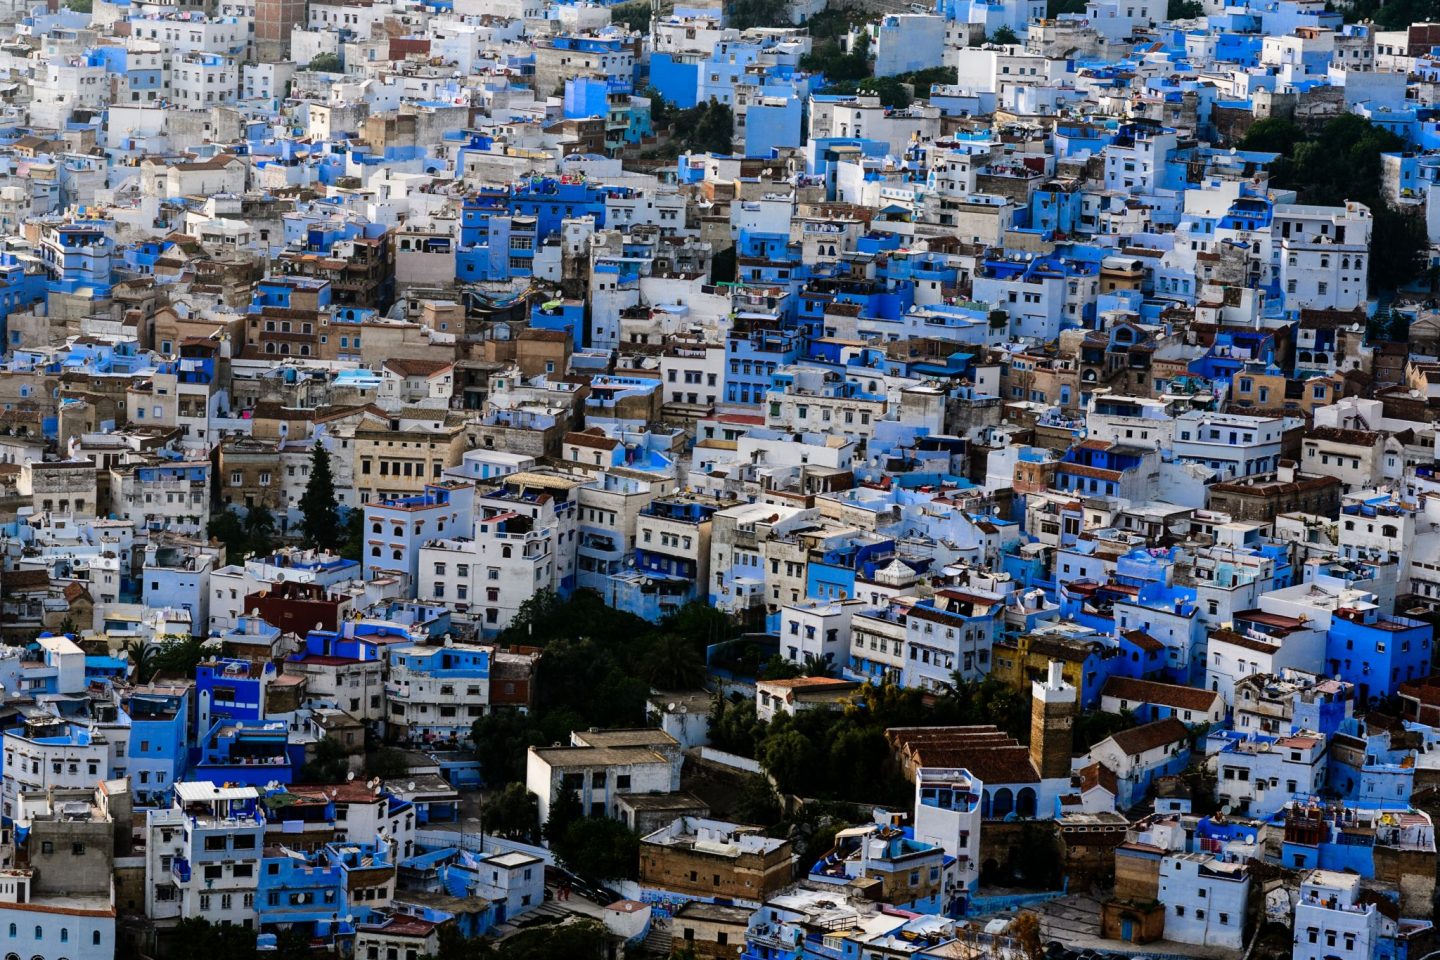 Chefchaouen, Morocco is one of the world's most colourful cities